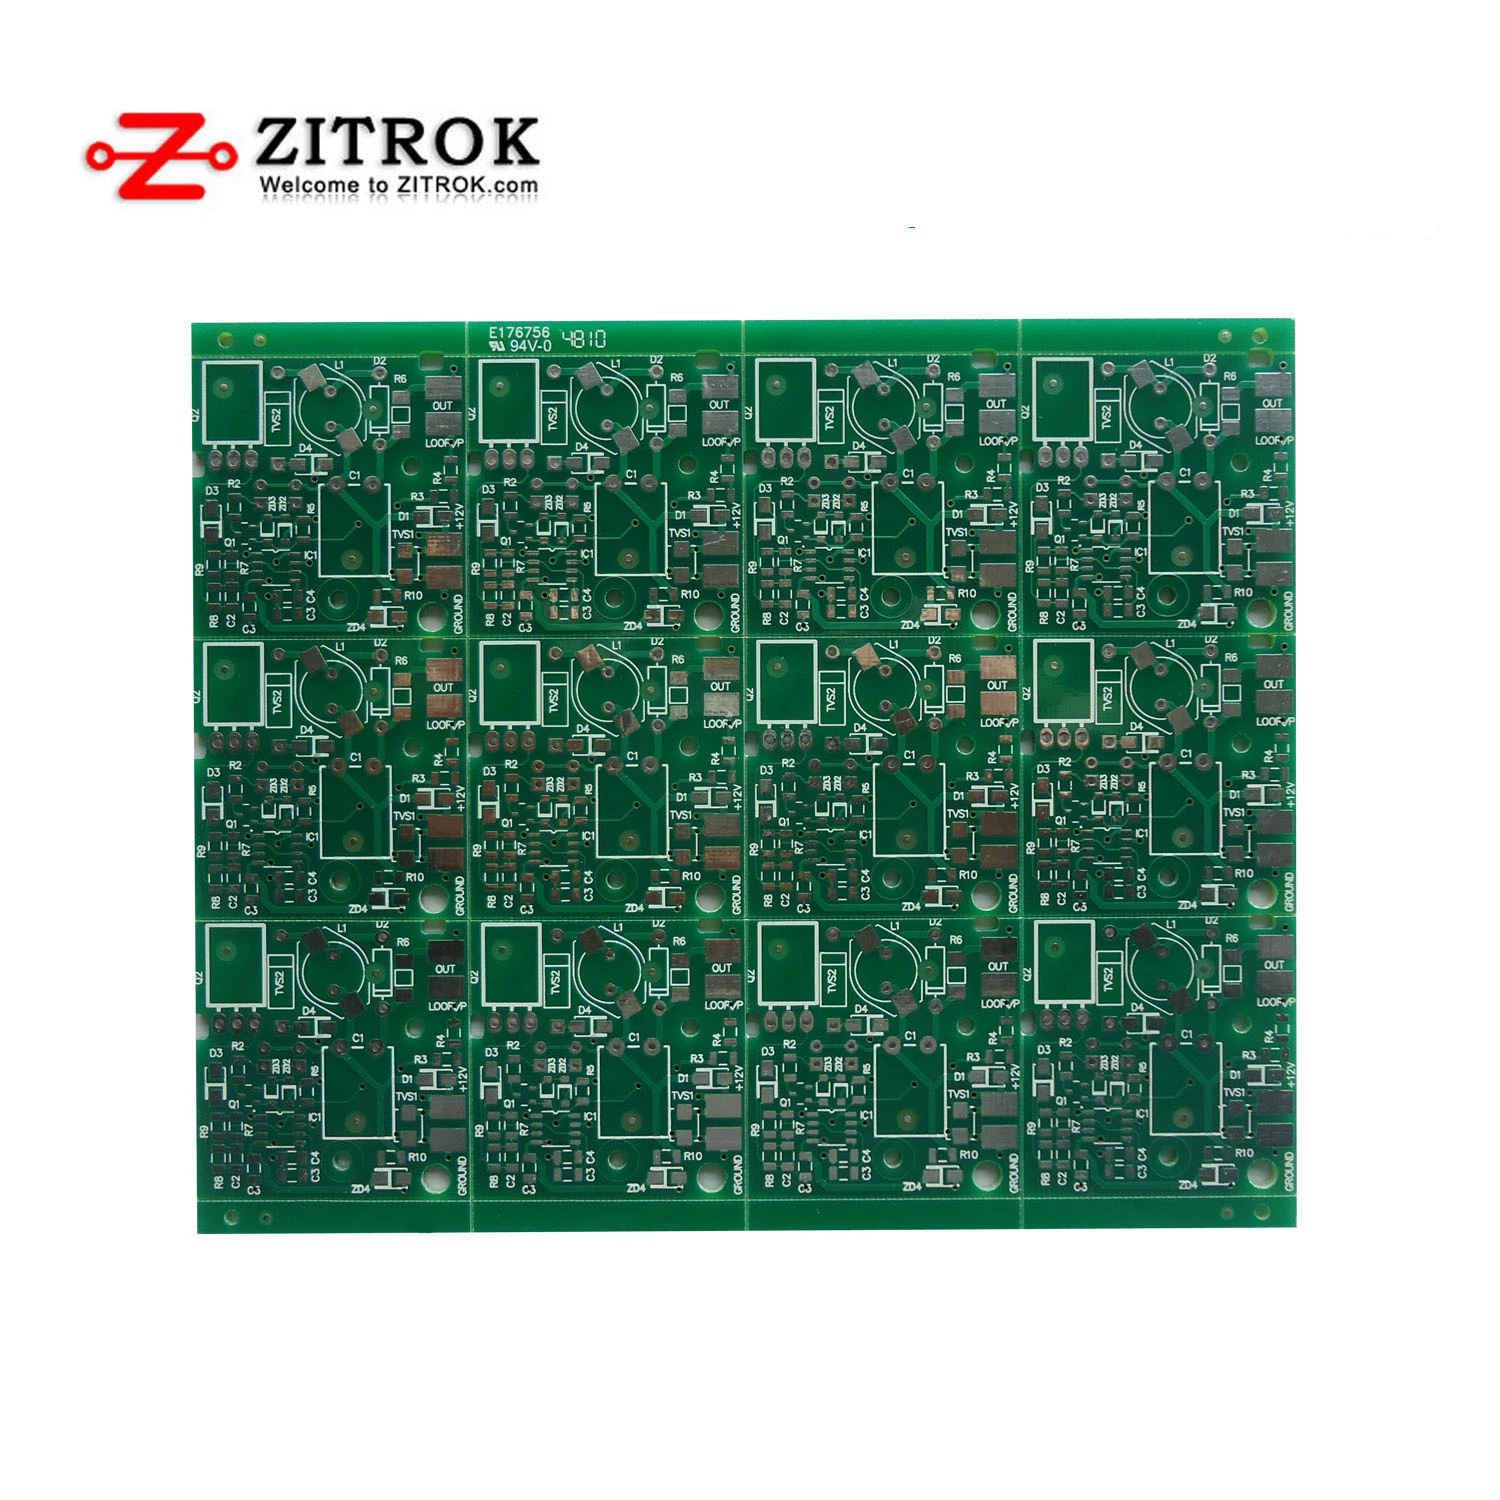 Copper PCB Board Manufacturing for Electronic Product Electronics Design PCB, EMS Turnkey PCB Assembly